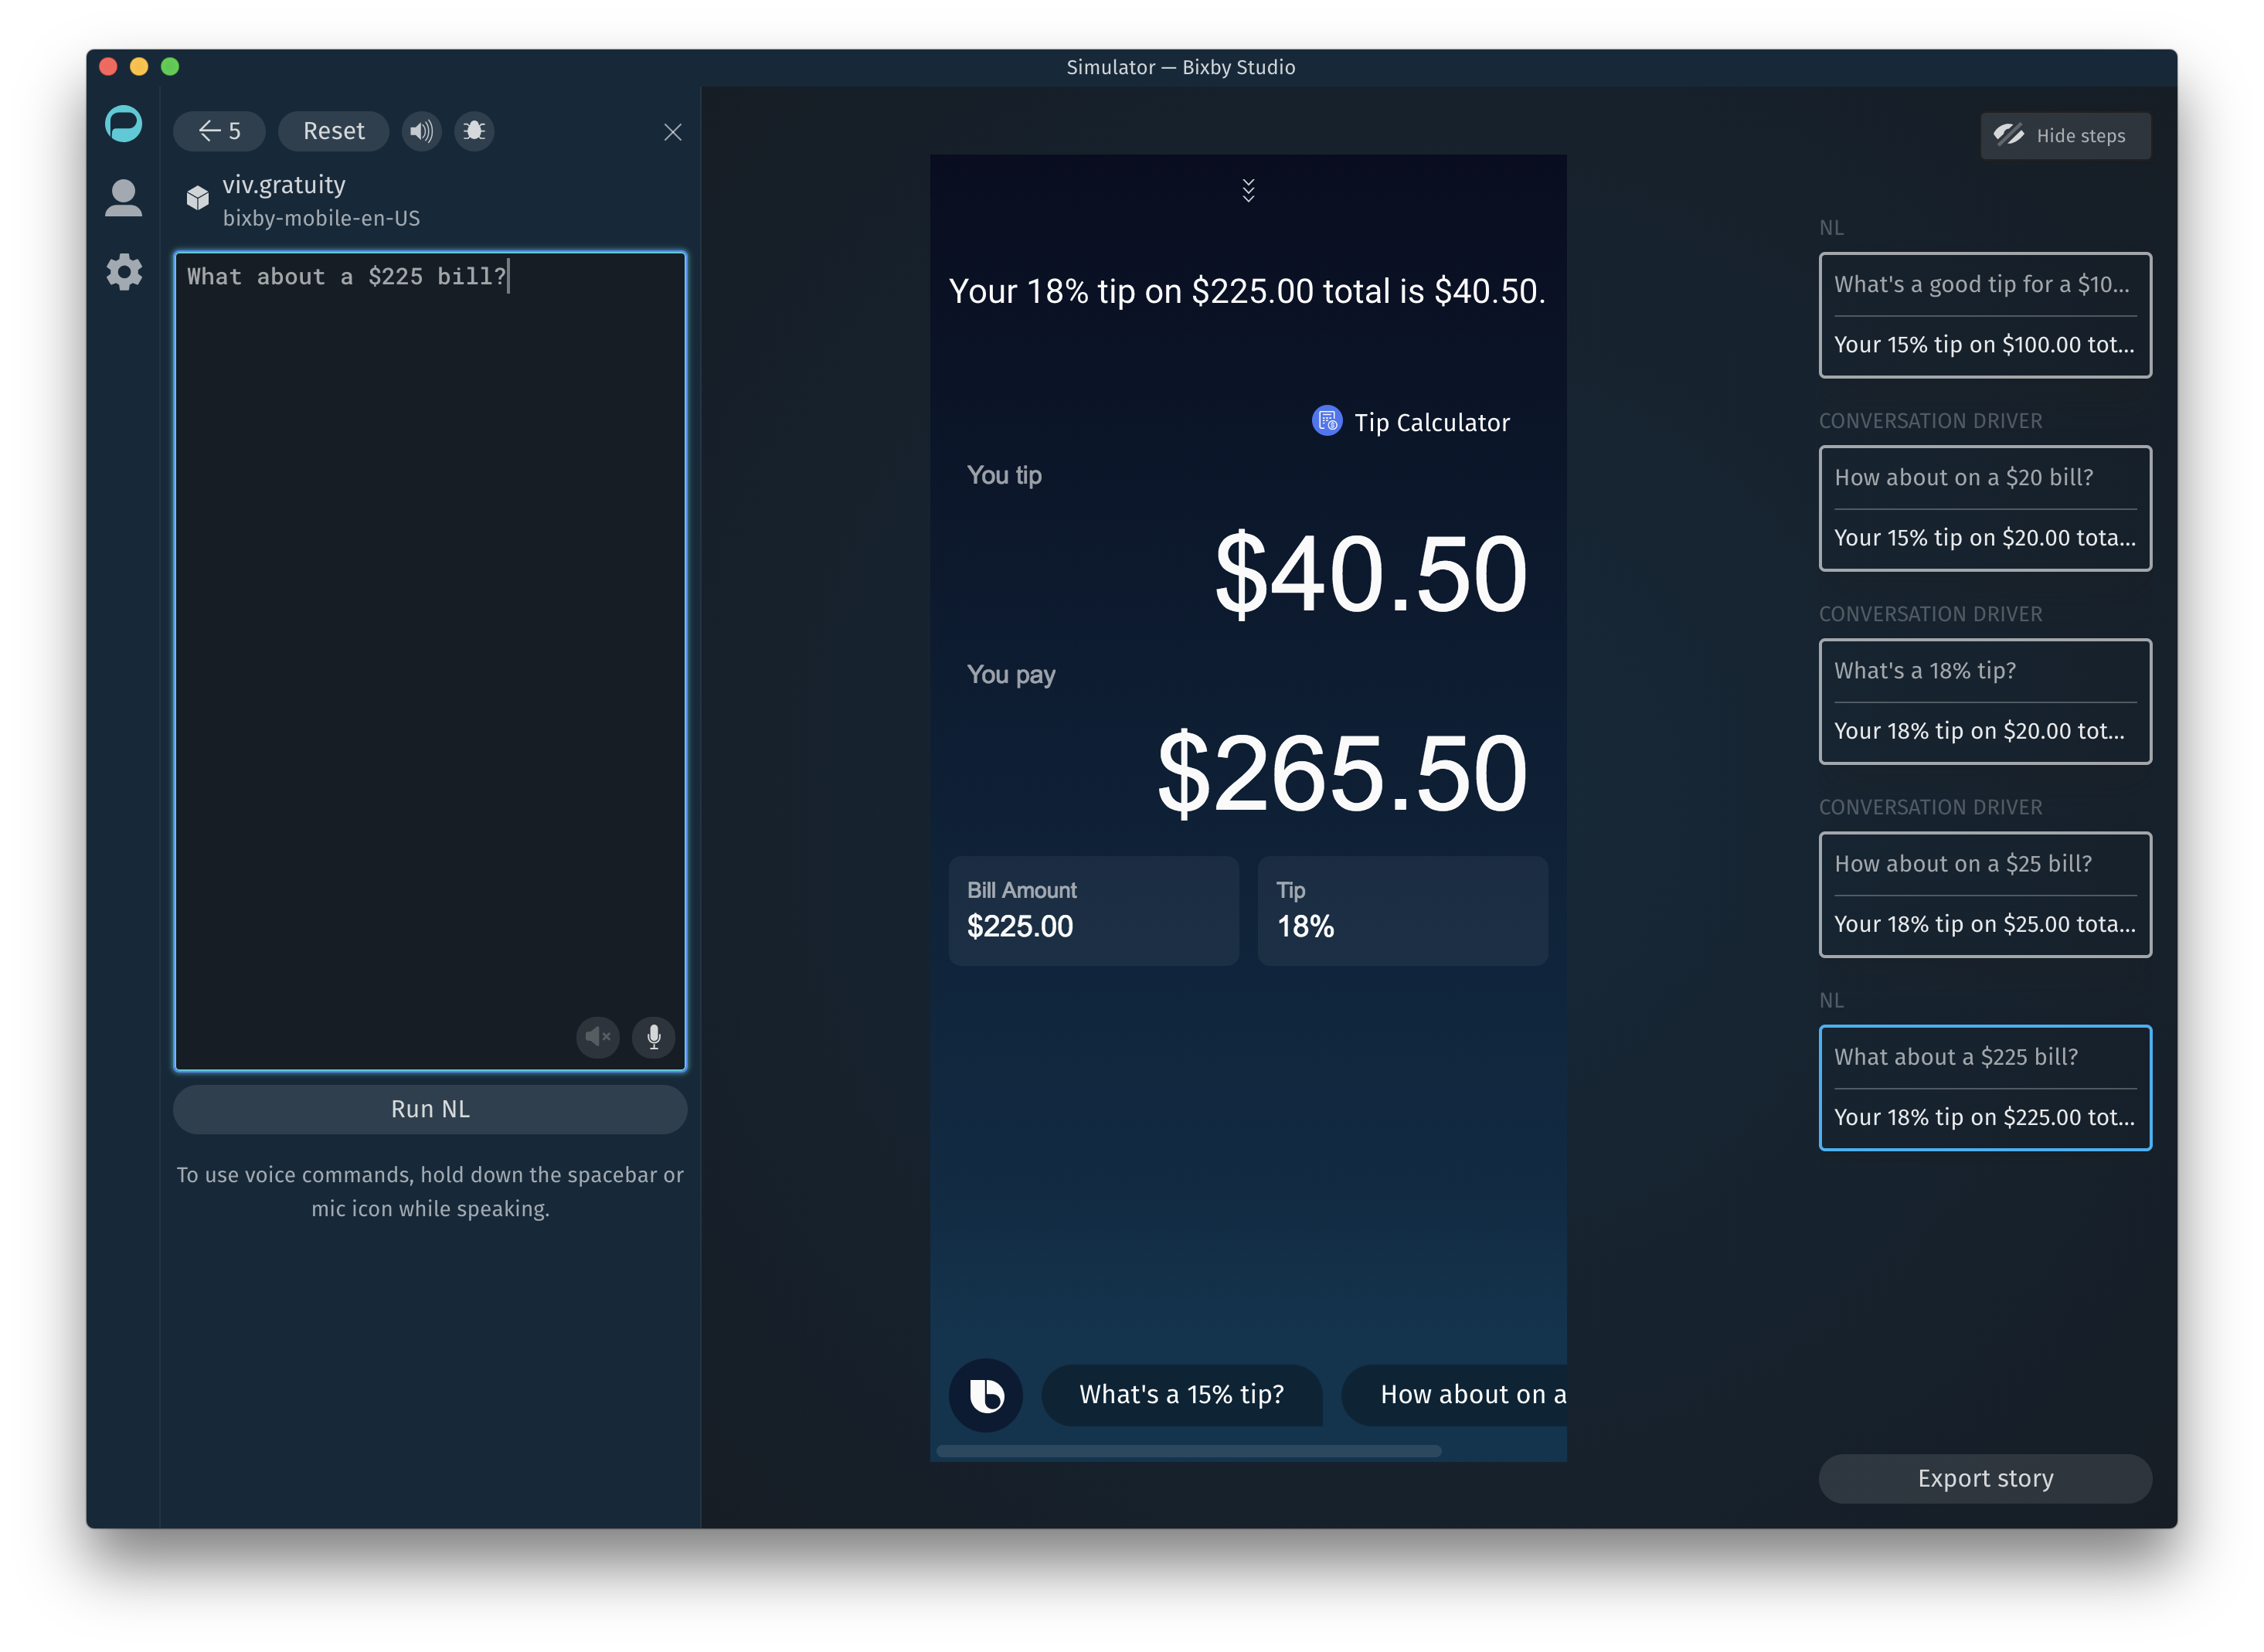 Example Simulator window for a "What's a good tip" story in a gratuity capsule